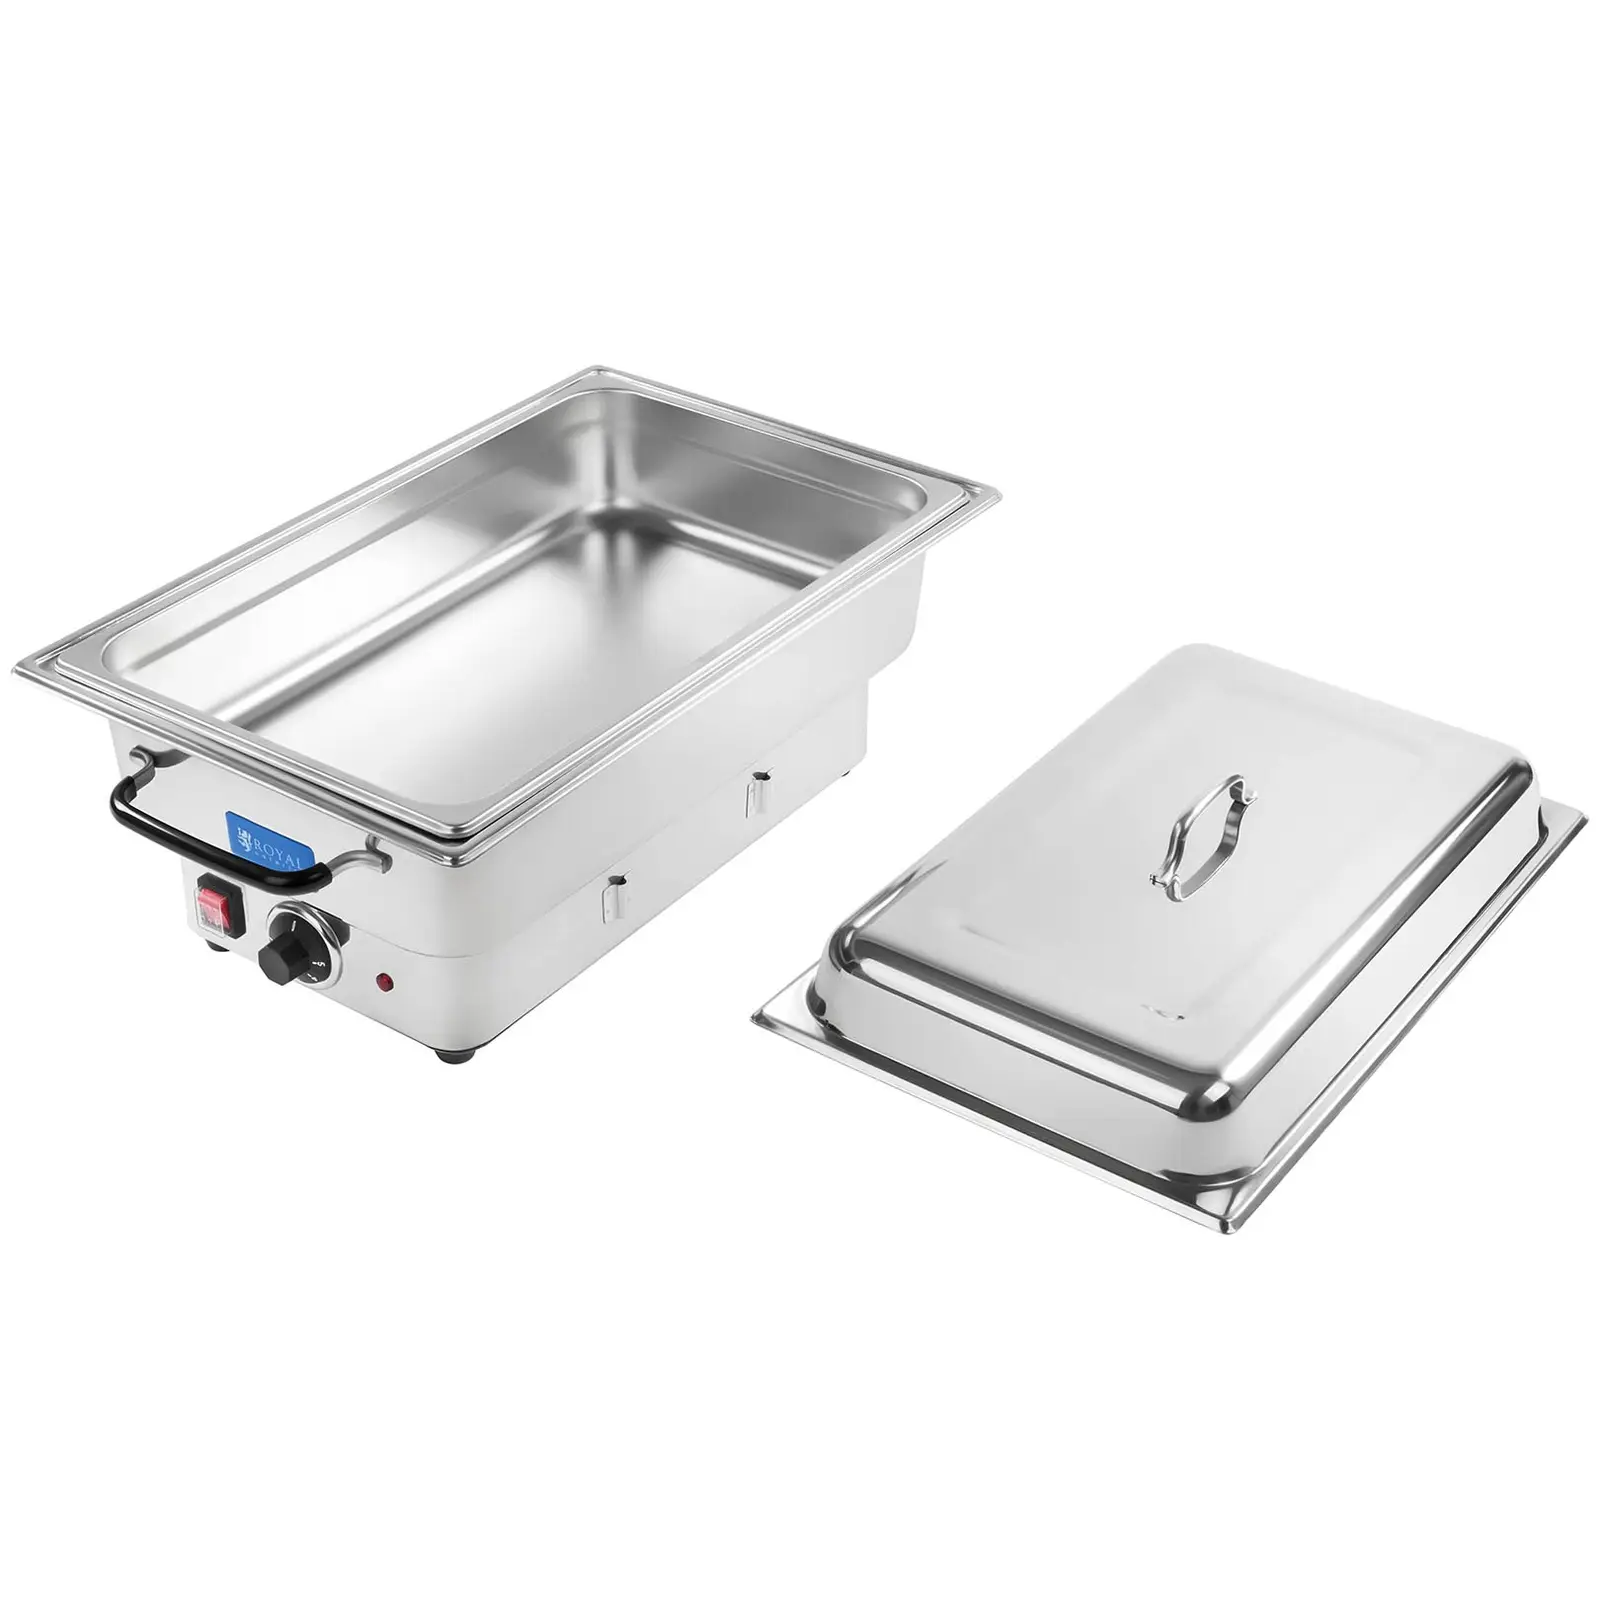 Chafing Dish - 1600 W - 100 mm djup - 13,3L volym - Inkl. 1/1 GN-behållare